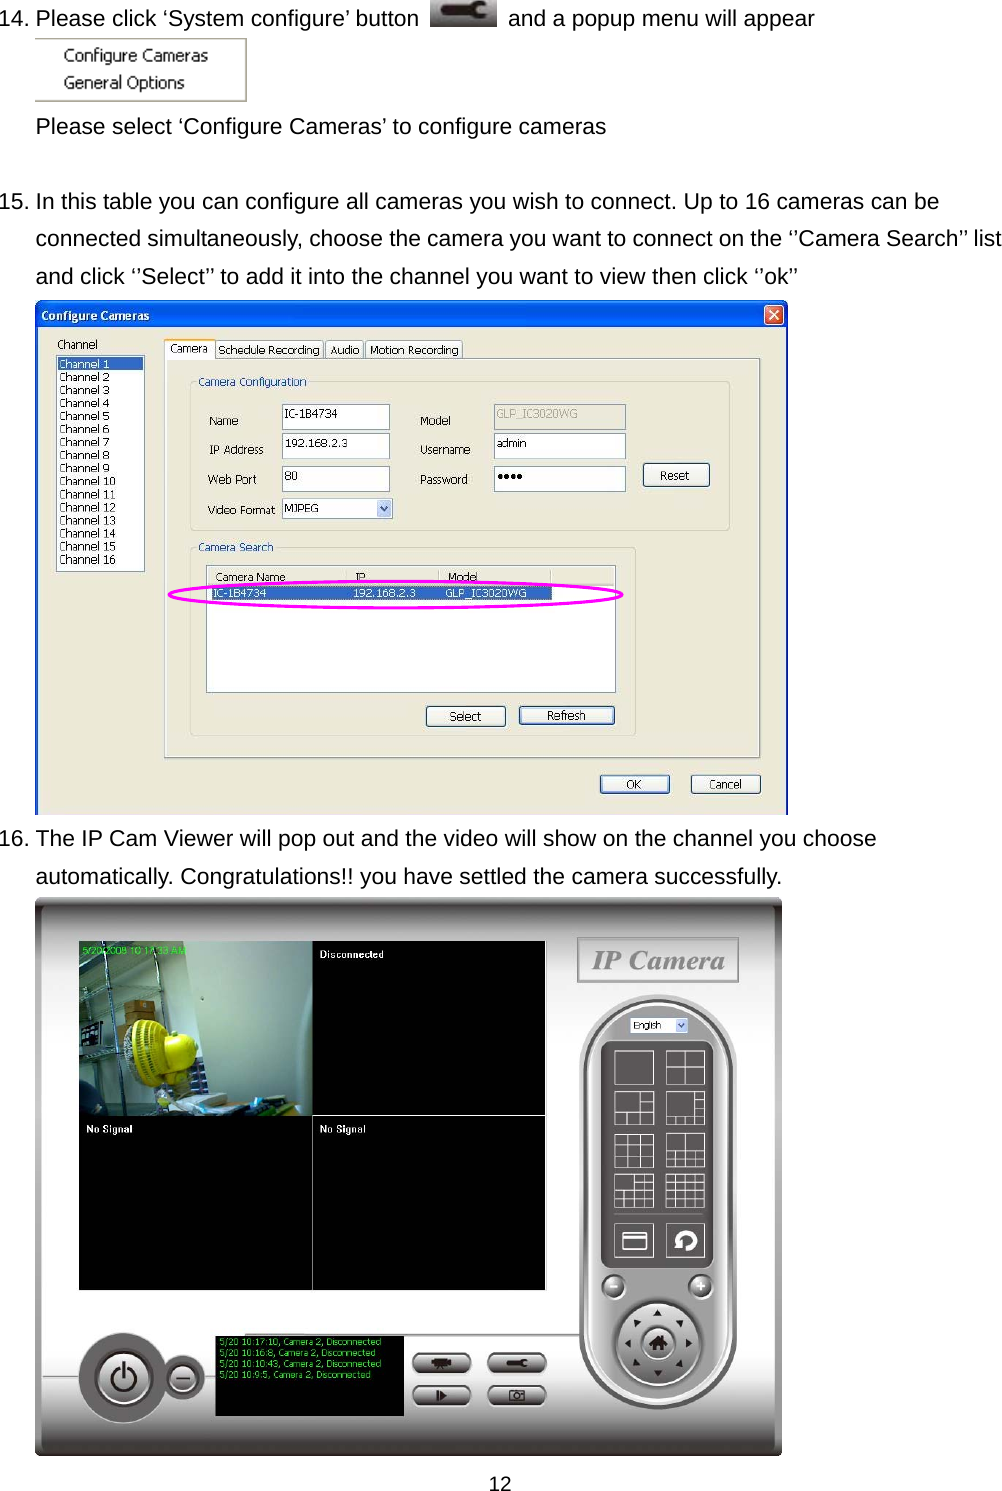    1214. Please click ‘System configure’ button    and a popup menu will appear  Please select ‘Configure Cameras’ to configure cameras  15. In this table you can configure all cameras you wish to connect. Up to 16 cameras can be connected simultaneously, choose the camera you want to connect on the ‘’Camera Search’’ list and click ‘’Select’’ to add it into the channel you want to view then click ‘’ok’’  16. The IP Cam Viewer will pop out and the video will show on the channel you choose automatically. Congratulations!! you have settled the camera successfully.  